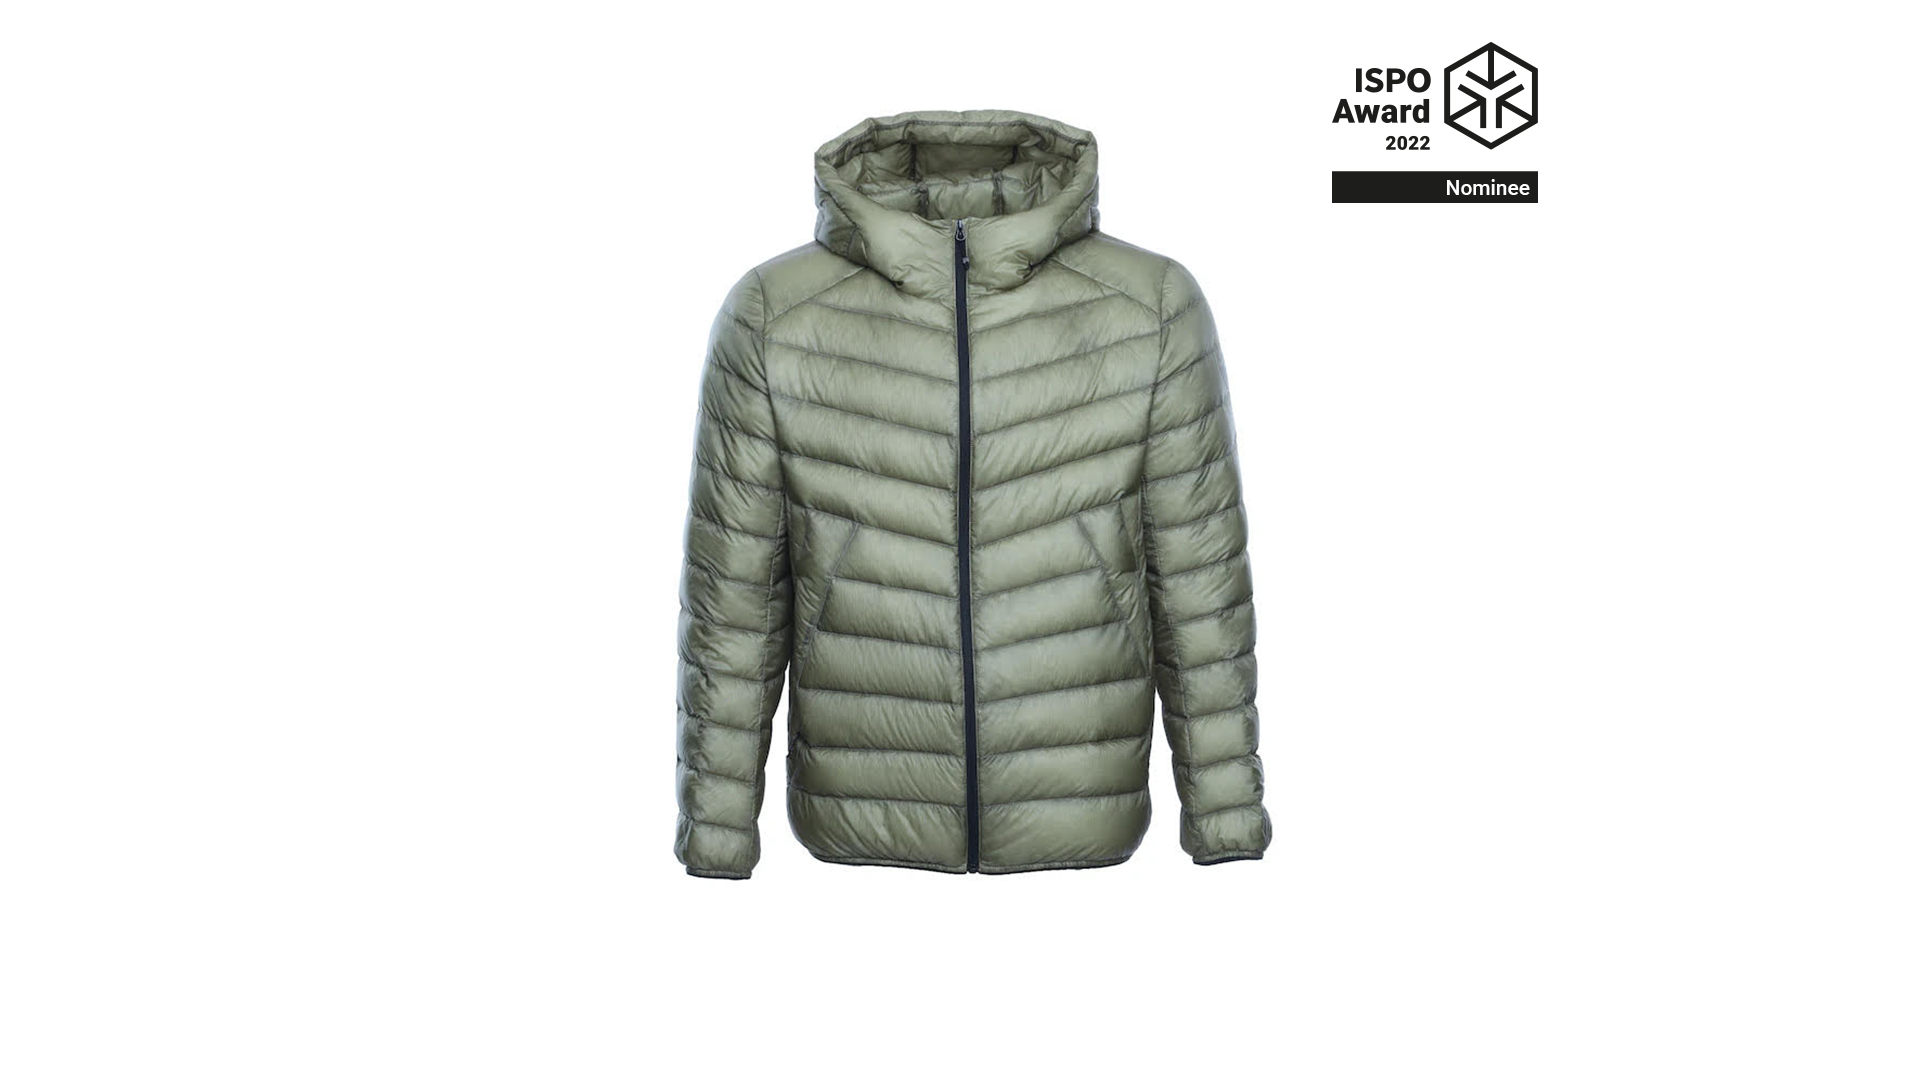 The Tanboer Superlight Down Jacket, a light down jacket for an